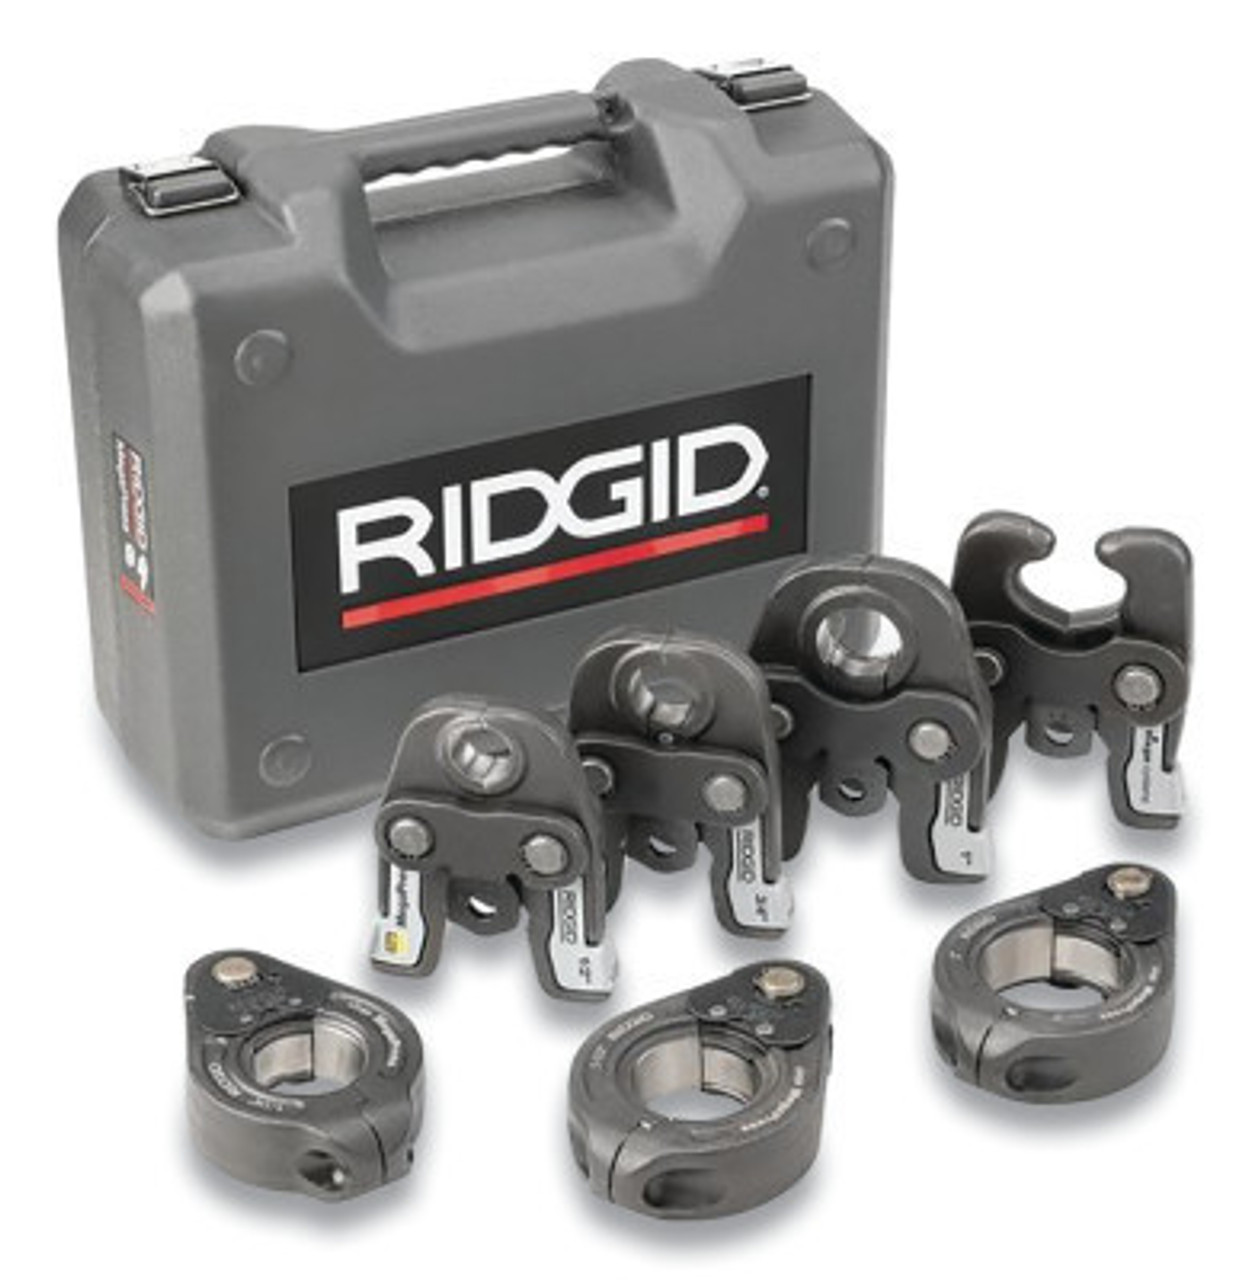 Electrical Connectors And Tool Rogo Fastener Co Inc In Electrical Terminals And Kits 